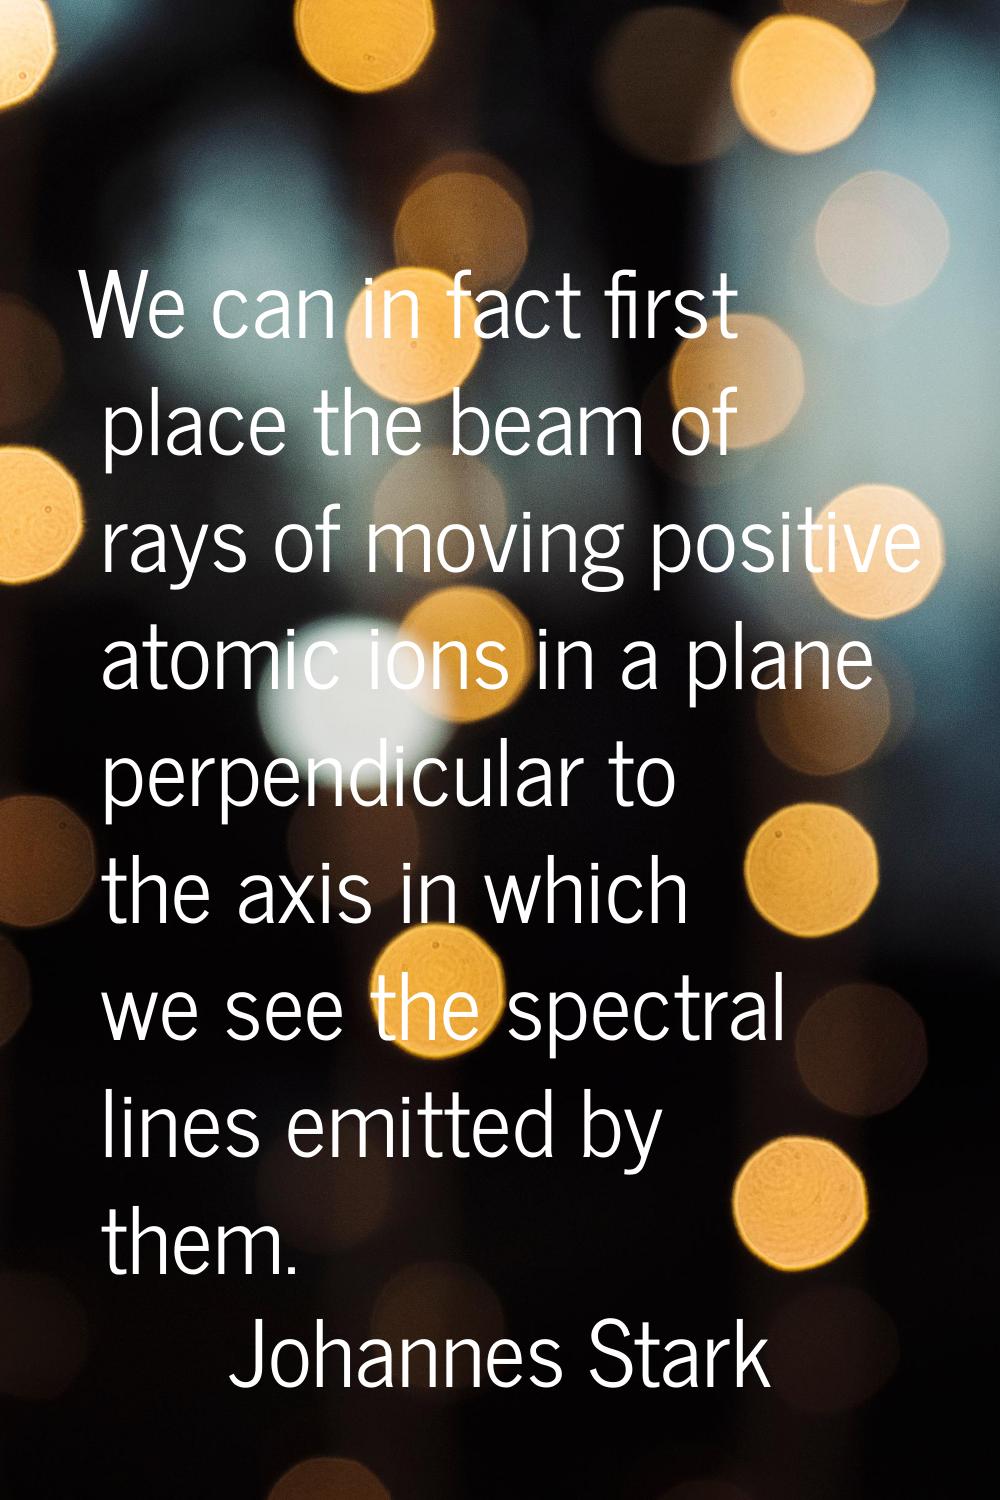 We can in fact first place the beam of rays of moving positive atomic ions in a plane perpendicular